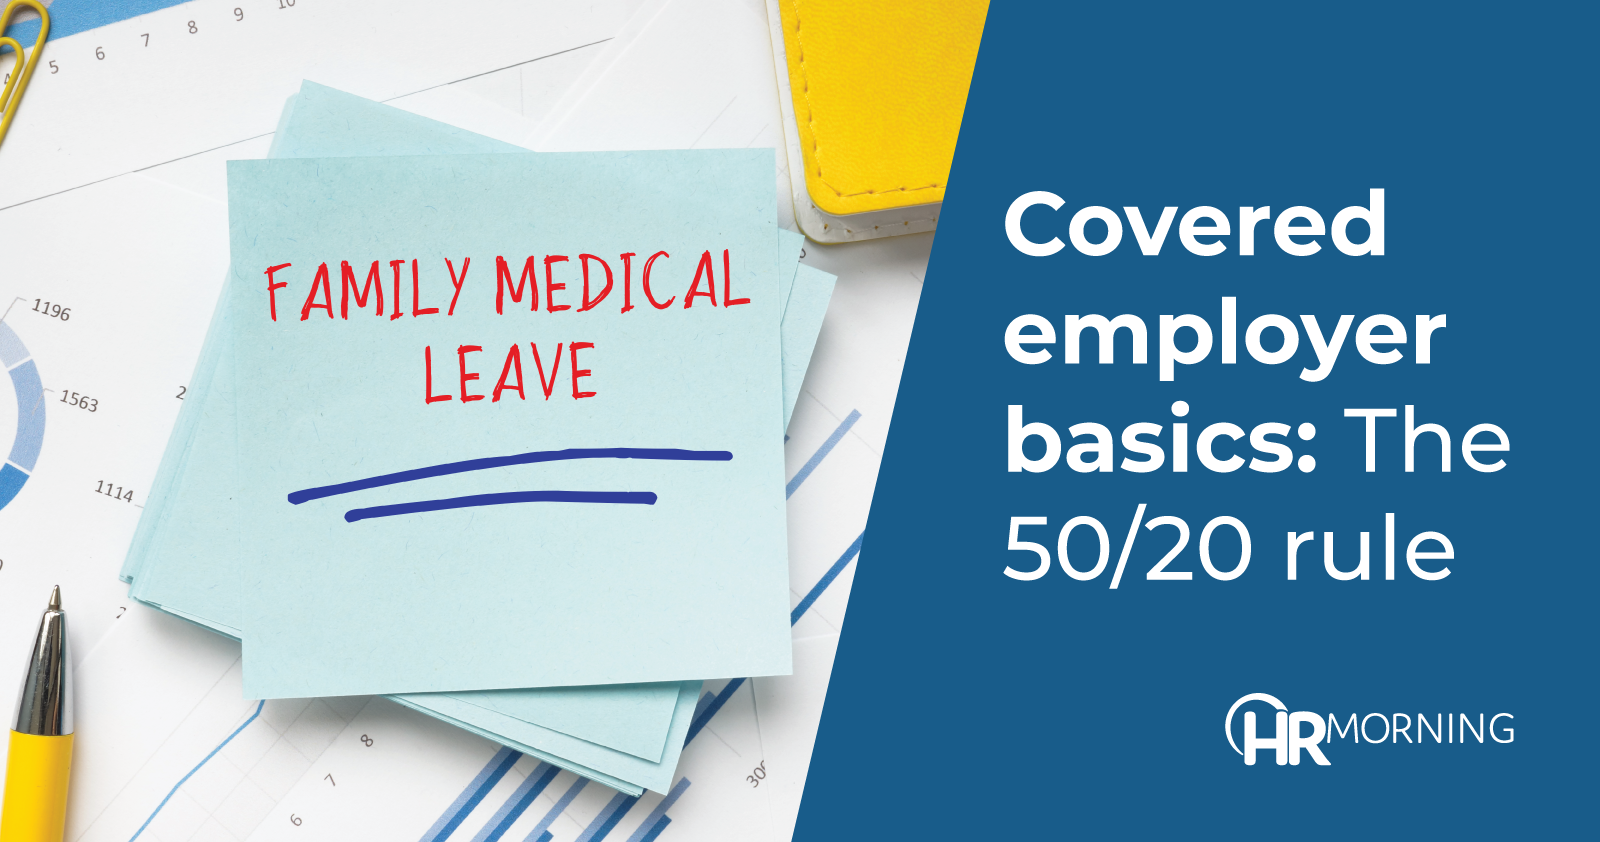 Covered employer basics: The 50/20 rule